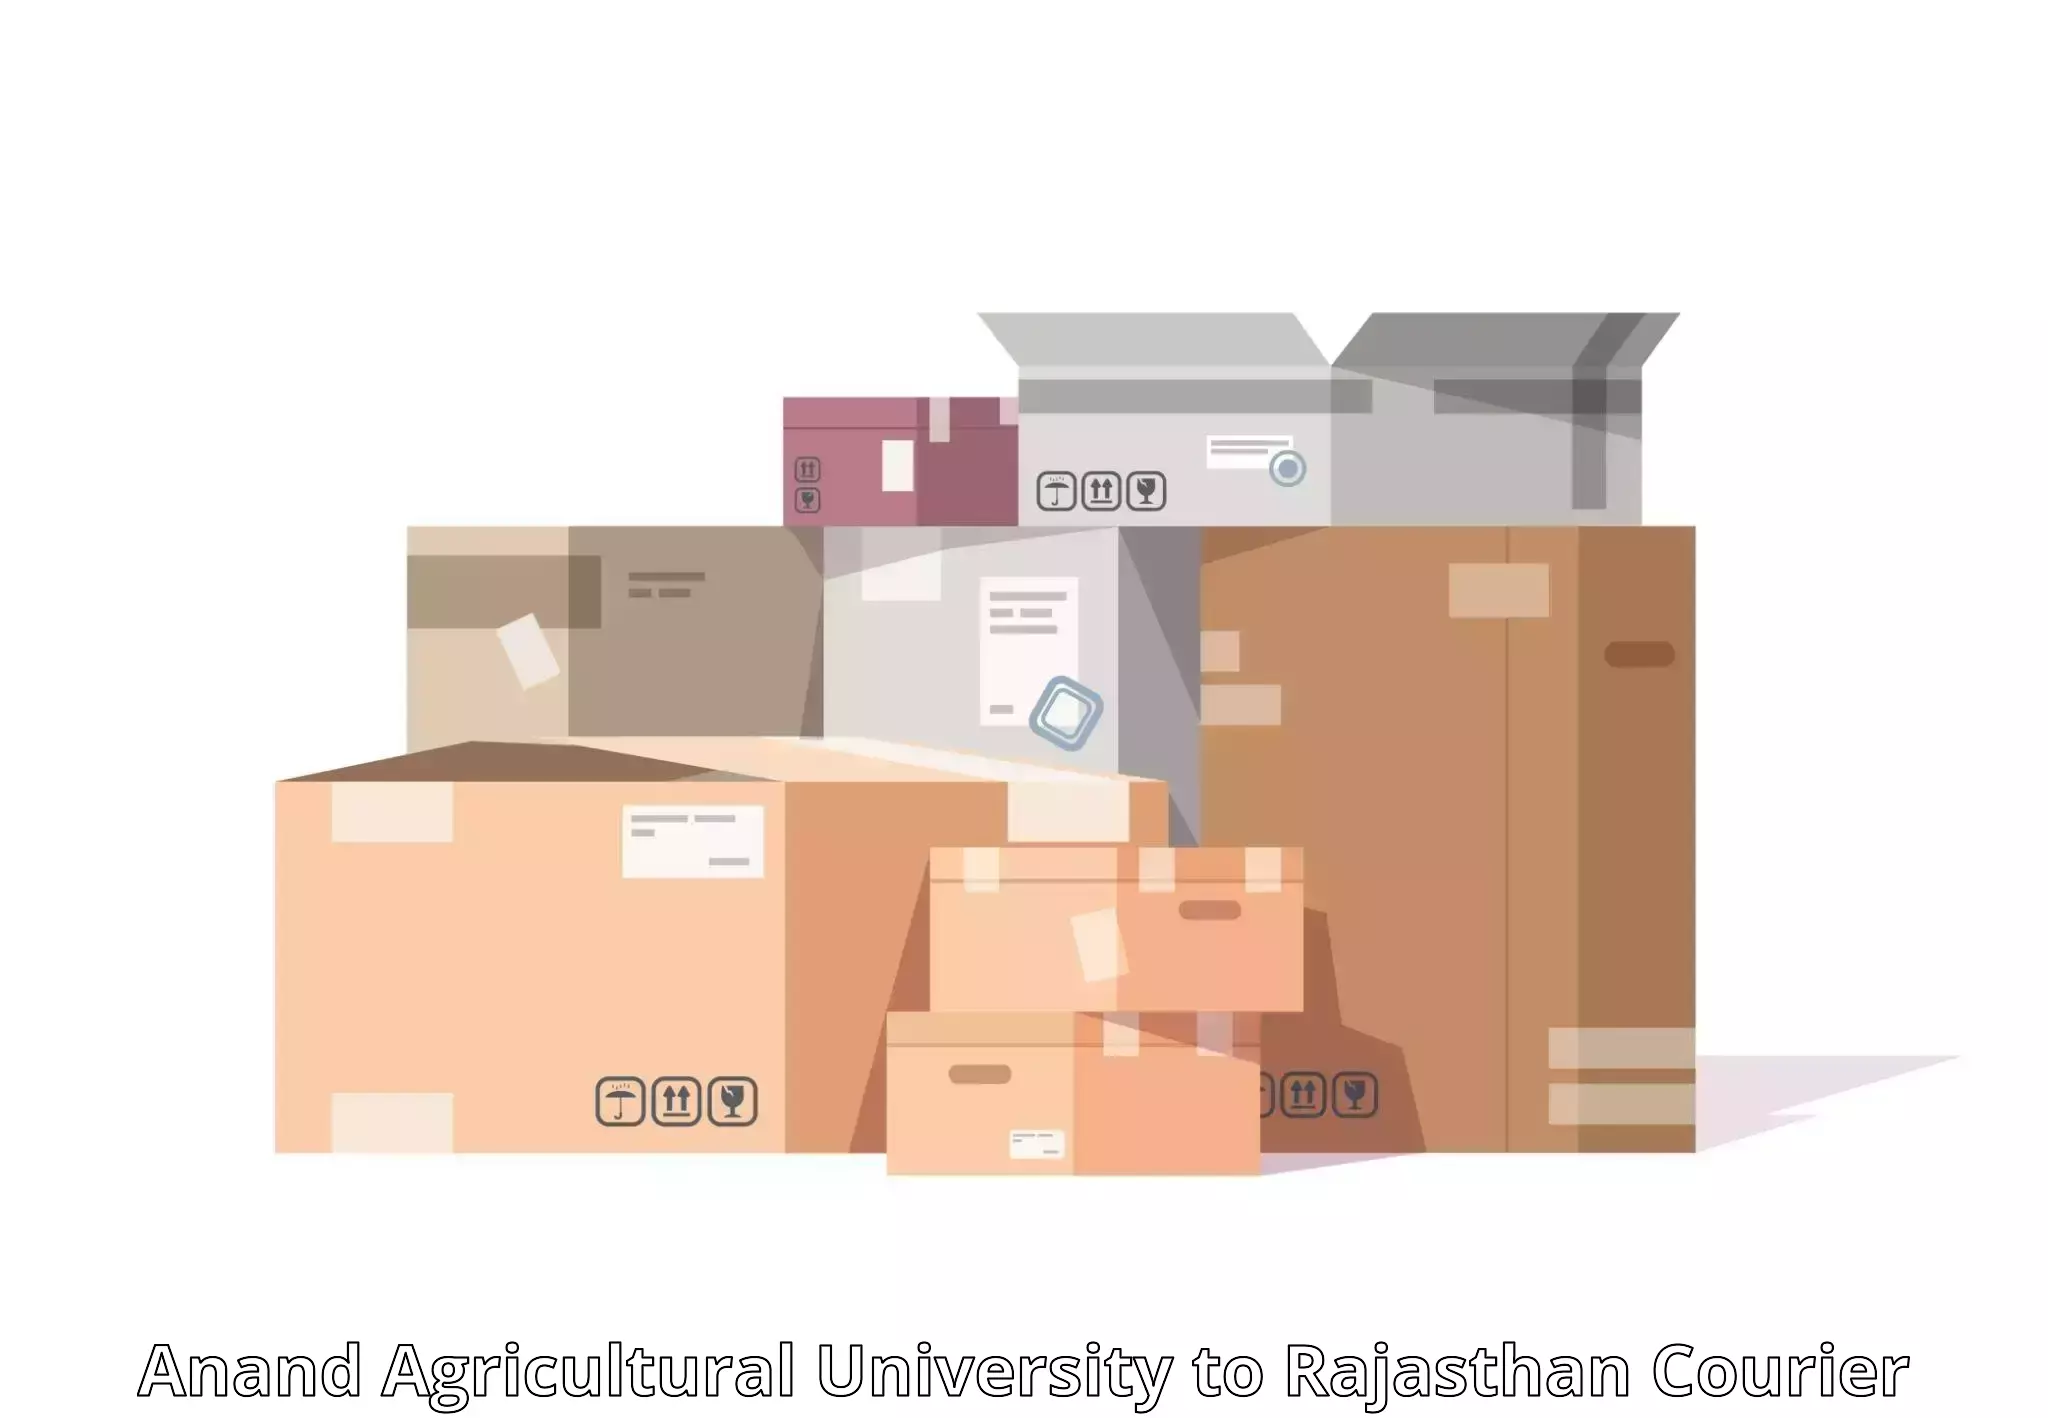 Package delivery network Anand Agricultural University to Bhawani Mandi